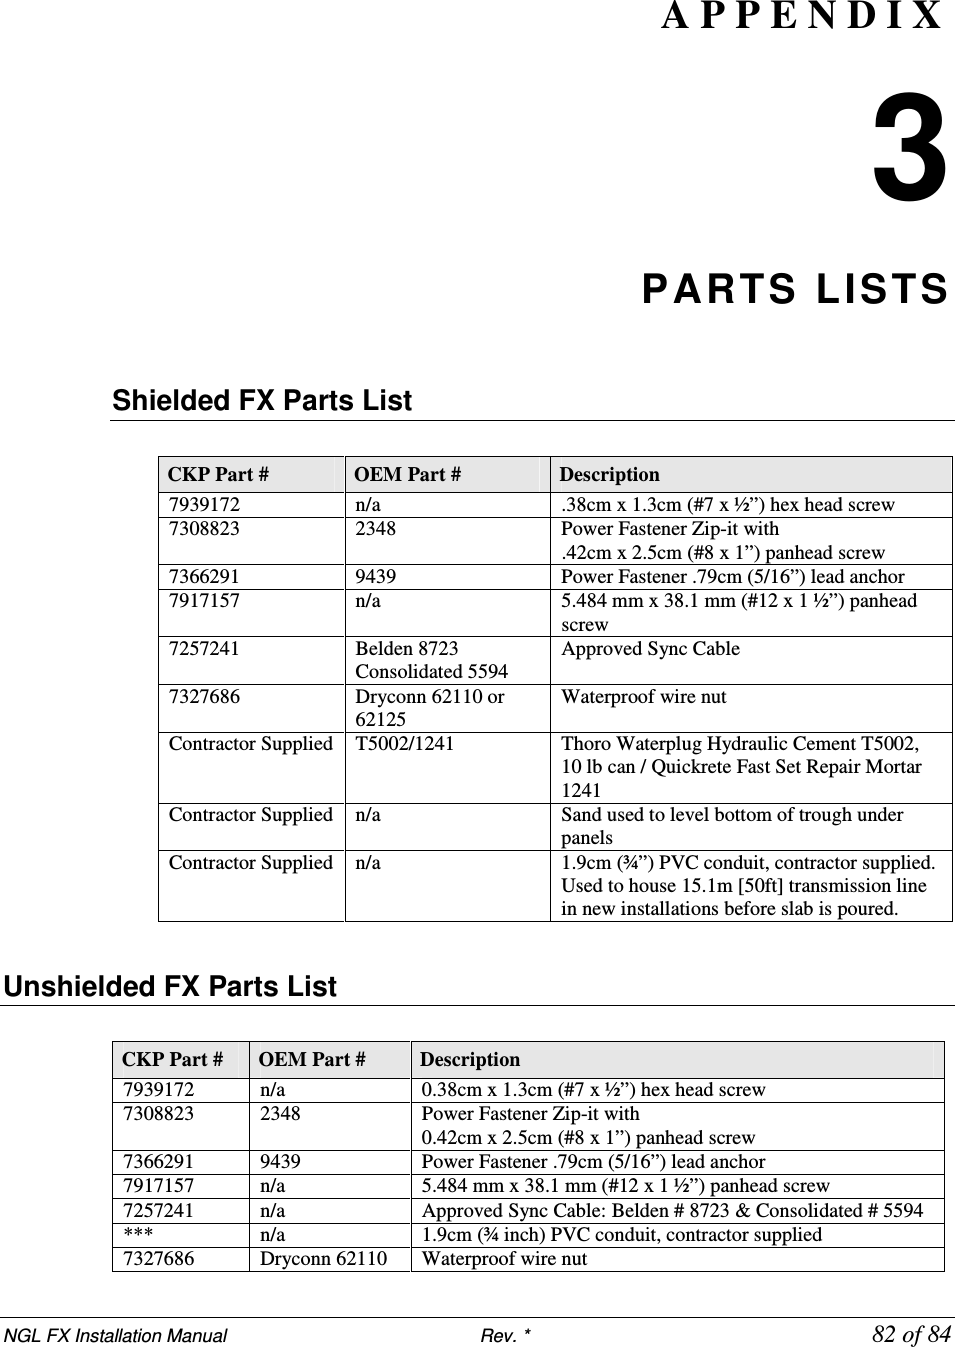 NGL FX Installation Manual                           Rev. *            82 of 84  A P P E N D I X  3 PARTS LIS TS  Shielded FX Parts List  CKP Part #  OEM Part #  Description 7939172  n/a  .38cm x 1.3cm (#7 x ½”) hex head screw 7308823  2348  Power Fastener Zip-it with  .42cm x 2.5cm (#8 x 1”) panhead screw 7366291  9439  Power Fastener .79cm (5/16”) lead anchor  7917157  n/a  5.484 mm x 38.1 mm (#12 x 1 ½”) panhead screw 7257241  Belden 8723 Consolidated 5594 Approved Sync Cable 7327686  Dryconn 62110 or 62125 Waterproof wire nut Contractor Supplied T5002/1241  Thoro Waterplug Hydraulic Cement T5002, 10 lb can / Quickrete Fast Set Repair Mortar 1241 Contractor Supplied n/a  Sand used to level bottom of trough under panels  Contractor Supplied n/a  1.9cm (¾”) PVC conduit, contractor supplied. Used to house 15.1m [50ft] transmission line in new installations before slab is poured.  Unshielded FX Parts List  CKP Part #  OEM Part #  Description 7939172  n/a  0.38cm x 1.3cm (#7 x ½”) hex head screw 7308823  2348  Power Fastener Zip-it with 0.42cm x 2.5cm (#8 x 1”) panhead screw 7366291  9439  Power Fastener .79cm (5/16”) lead anchor 7917157  n/a  5.484 mm x 38.1 mm (#12 x 1 ½”) panhead screw 7257241  n/a  Approved Sync Cable: Belden # 8723 &amp; Consolidated # 5594 ***  n/a  1.9cm (¾ inch) PVC conduit, contractor supplied 7327686  Dryconn 62110  Waterproof wire nut 